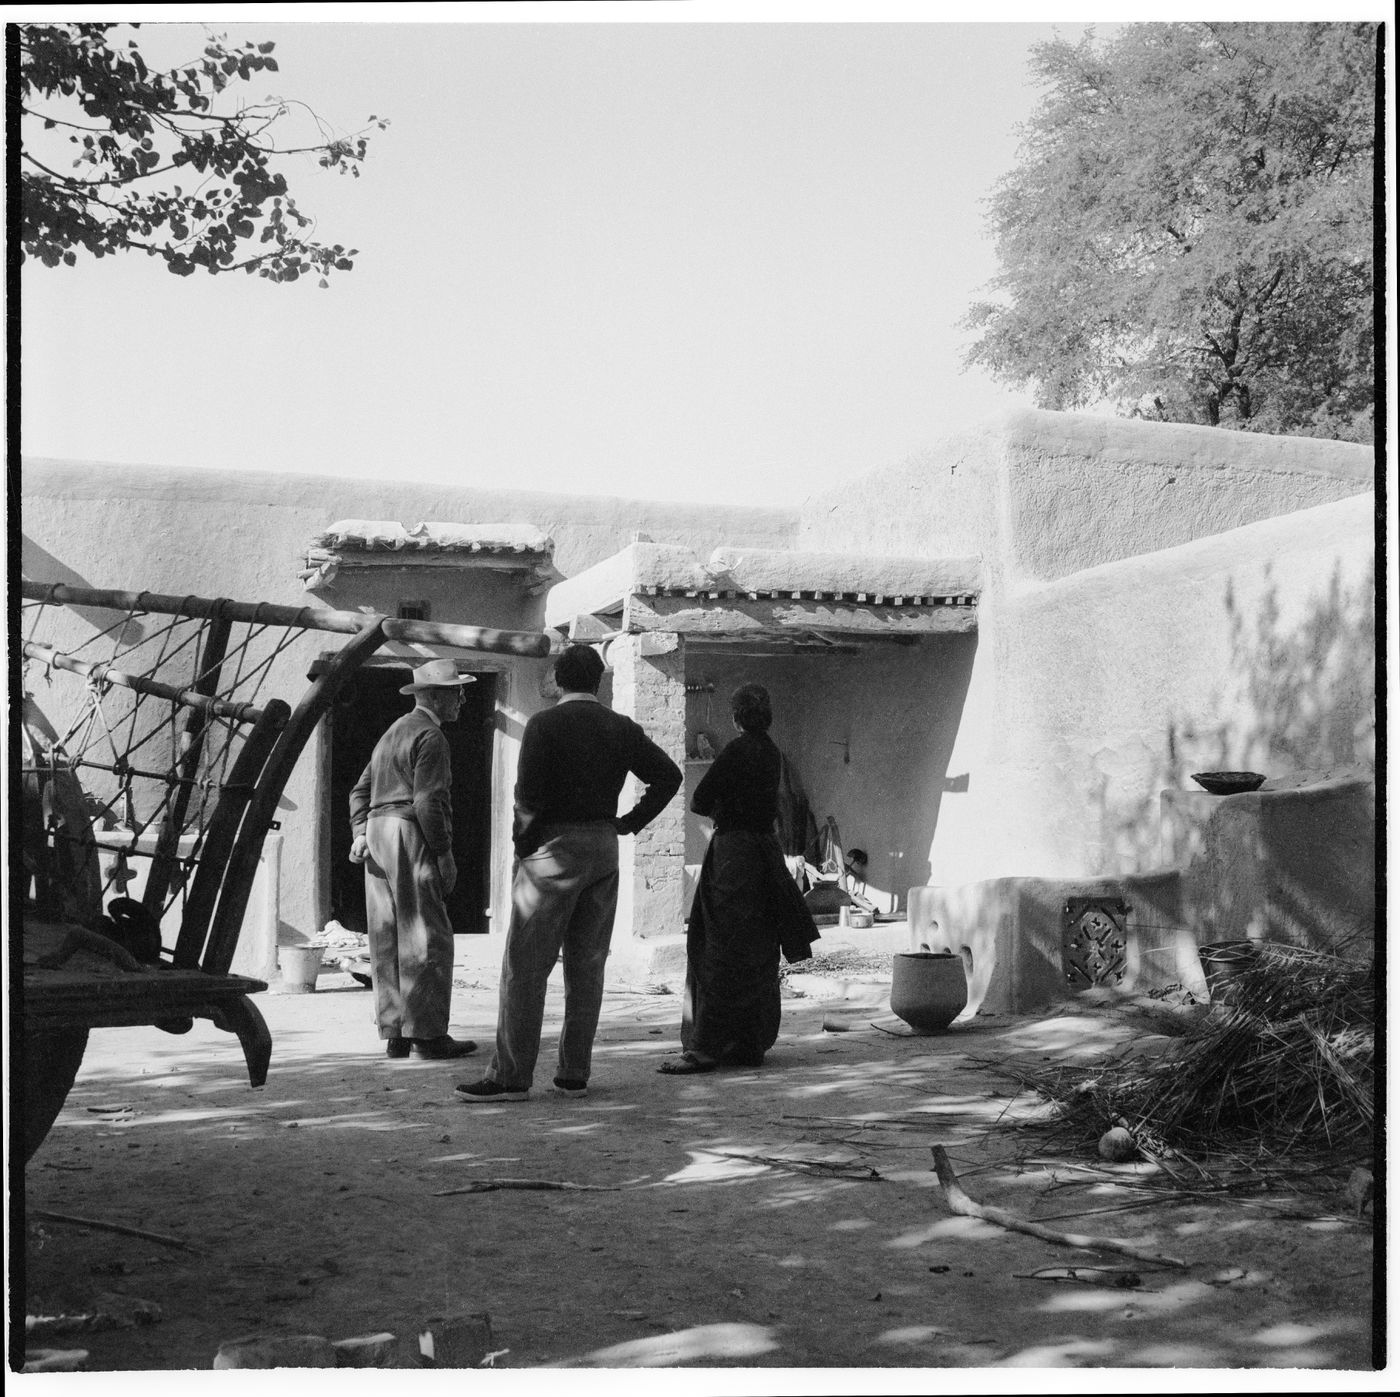 Le Corbusier with Mr. and Mrs. Prabhawalkar in a village near Chandigarh